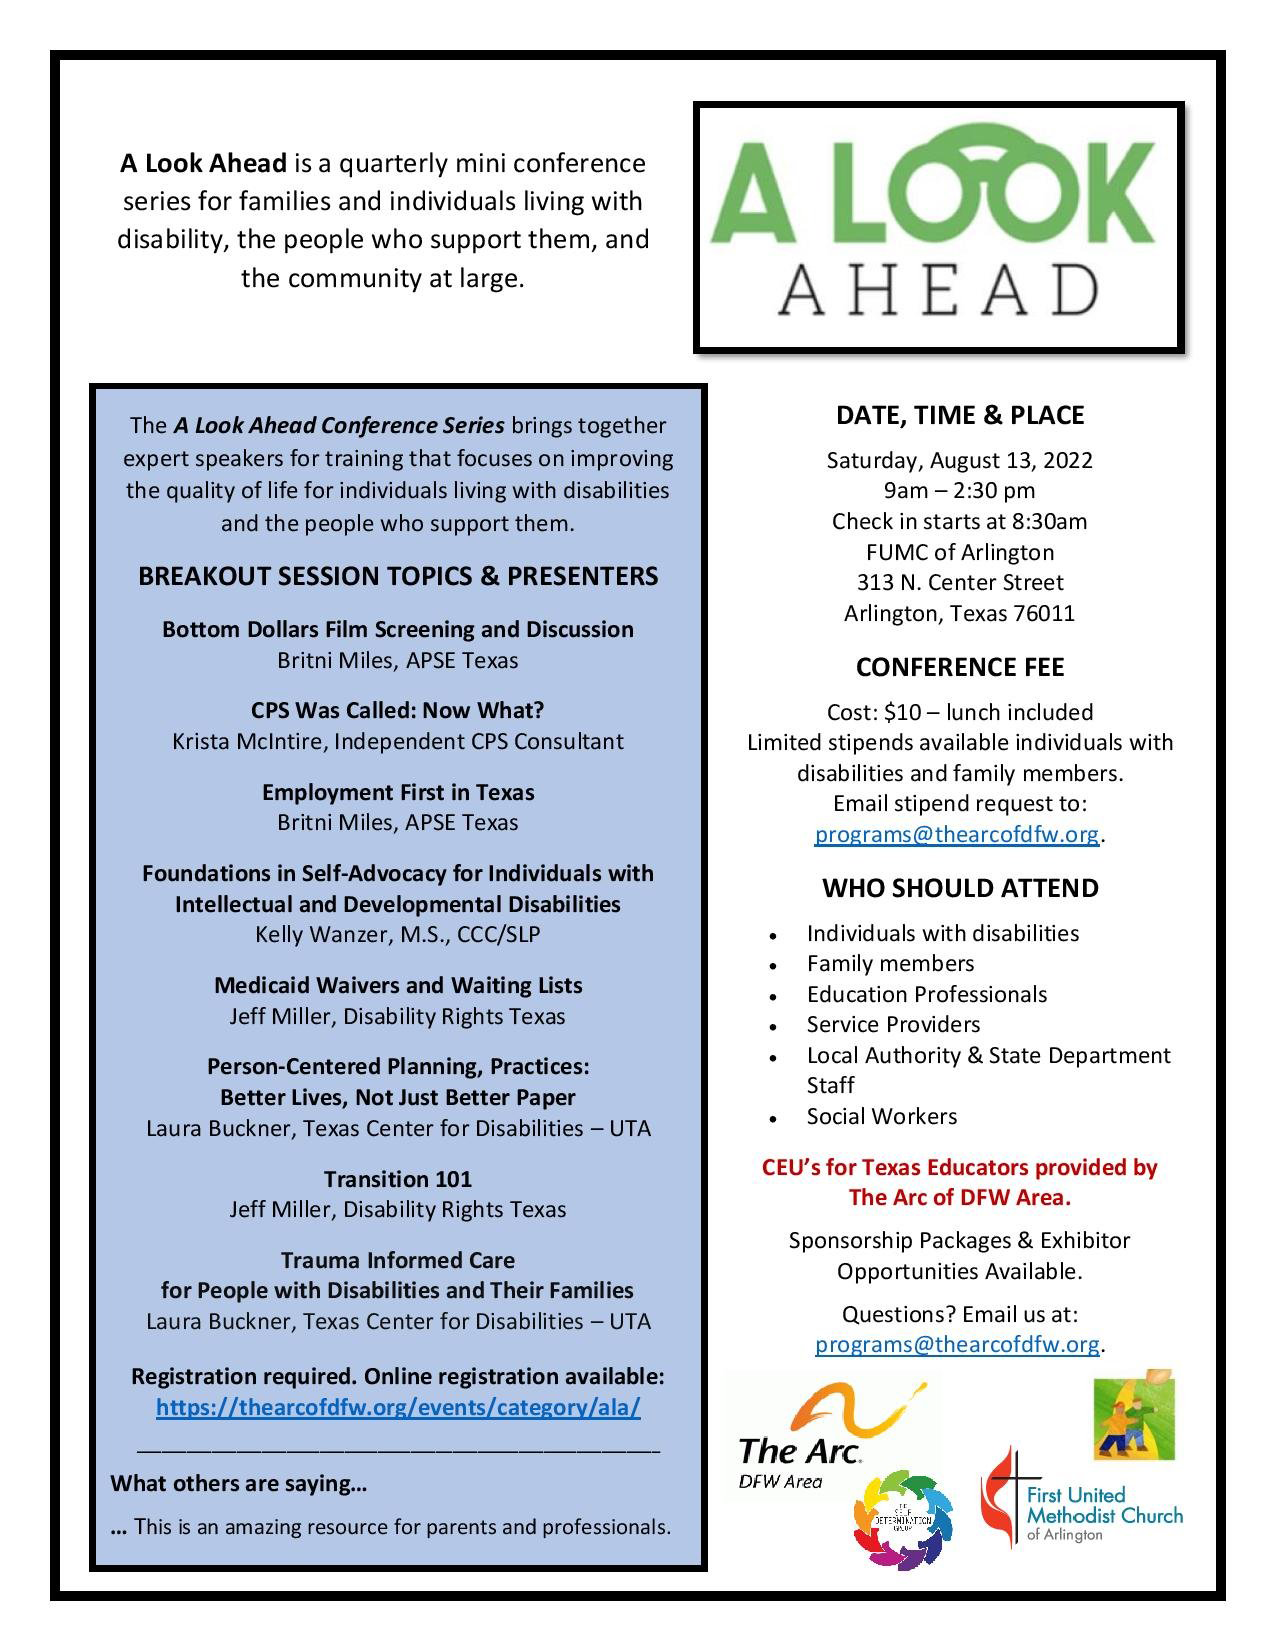 A Look Ahead Flyer: Held August 13, 2022 at 9:00AM; to register, visit: https://thearcofdfw.org/event/ala-aug-2022/